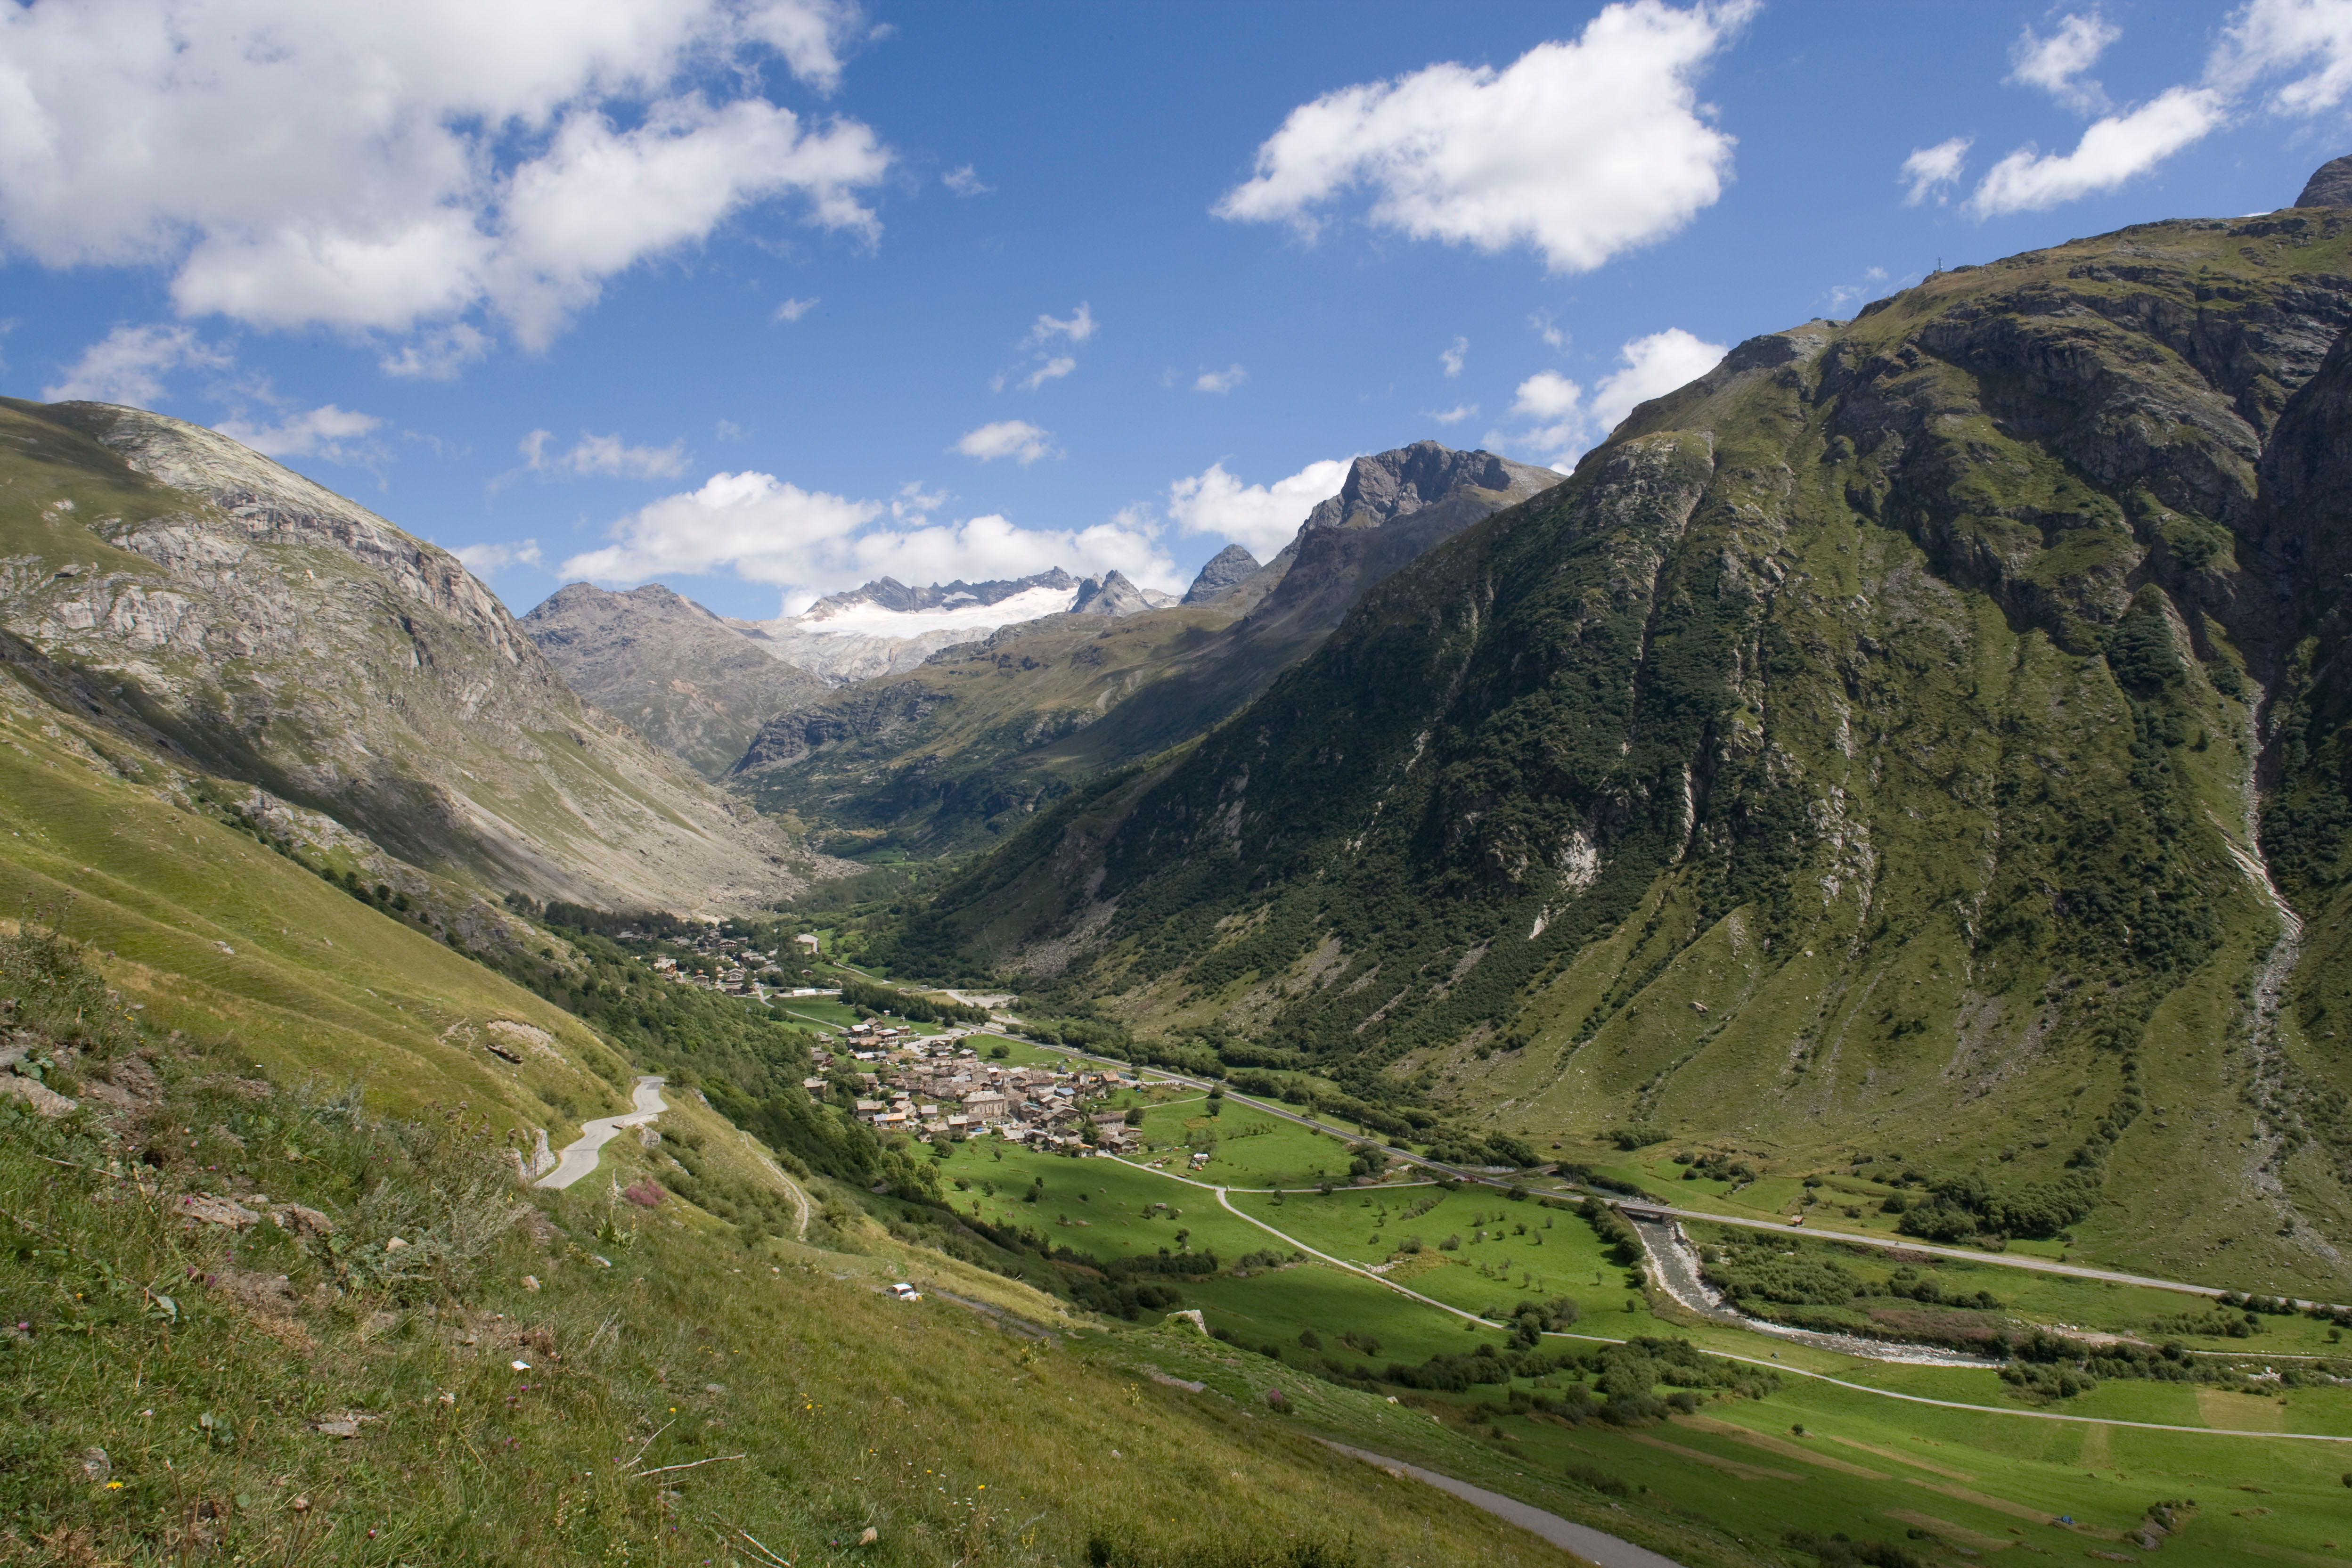 View of Bonneval-sur-Arc from the south side of the Col de l'Iseran in Haute-Maurienne - Vanoise